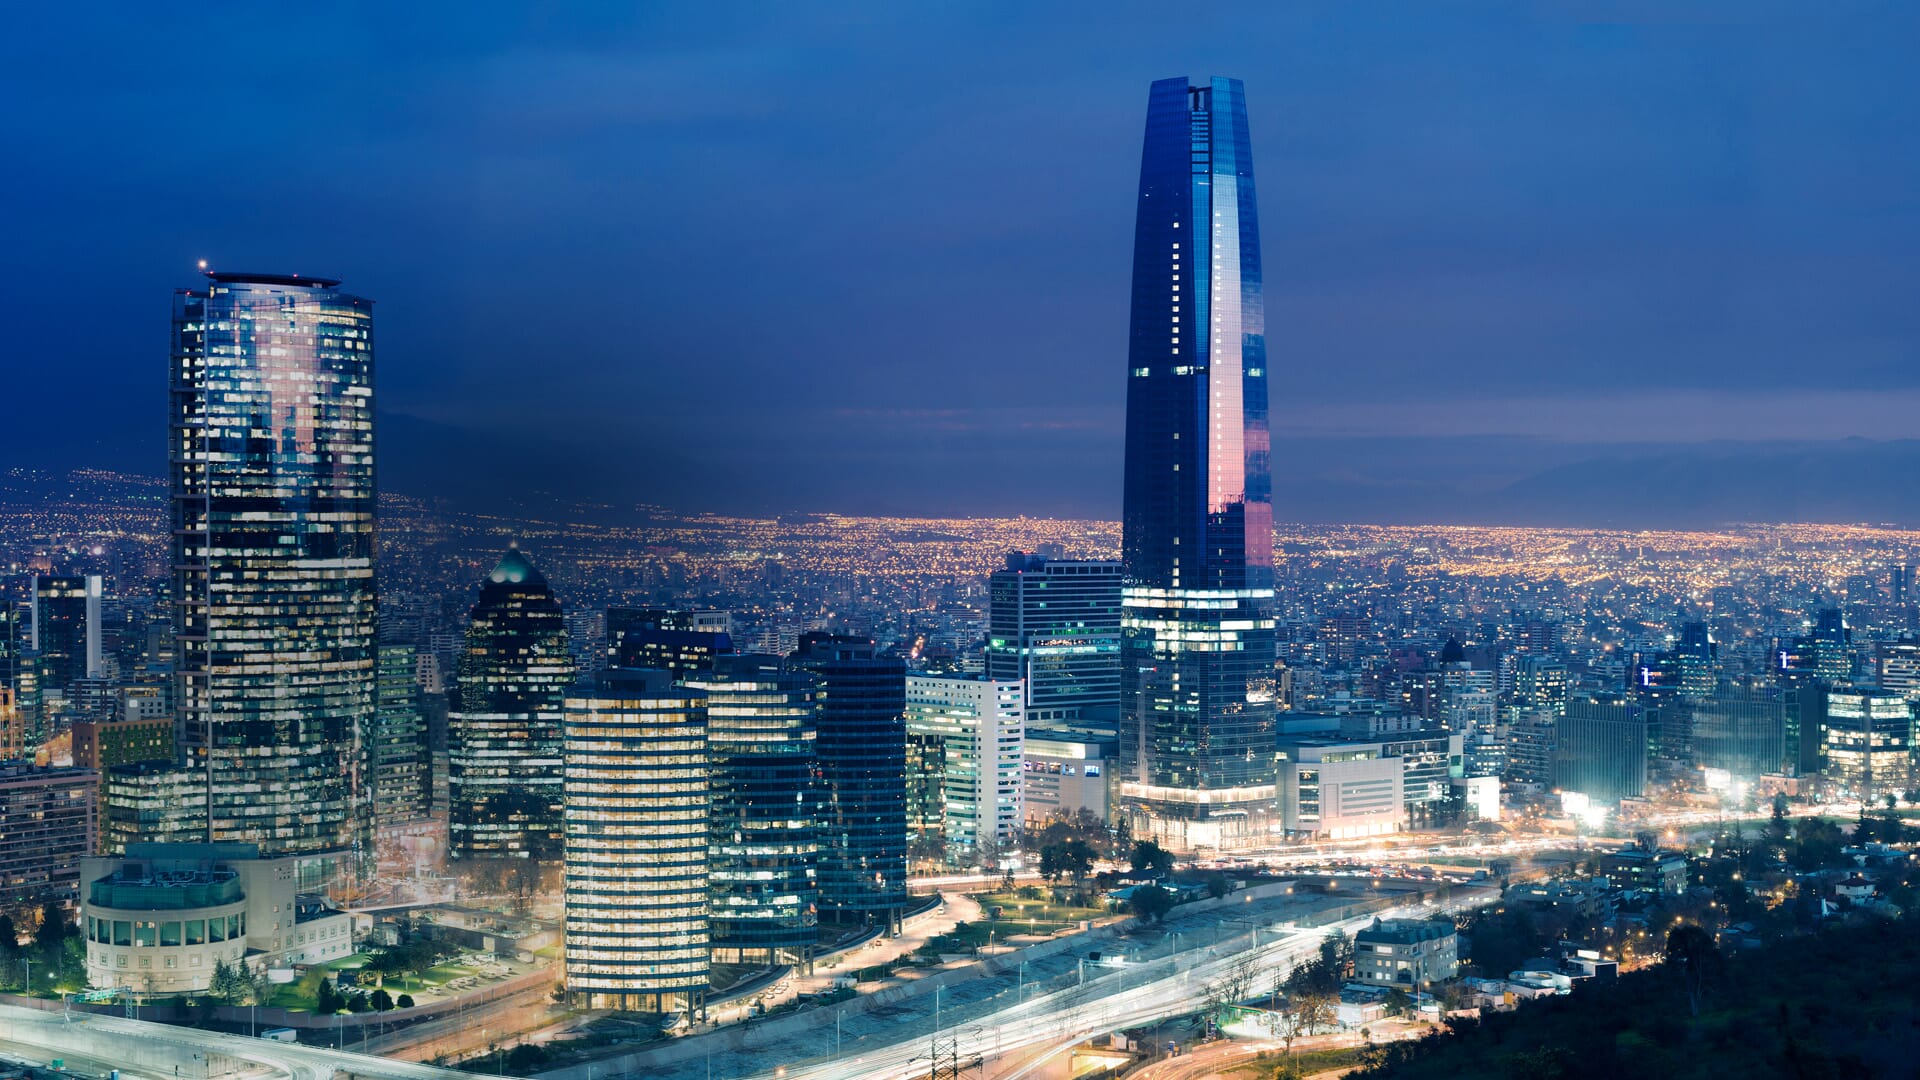 2019/2020 perspectives for new real estate projects in Colombia